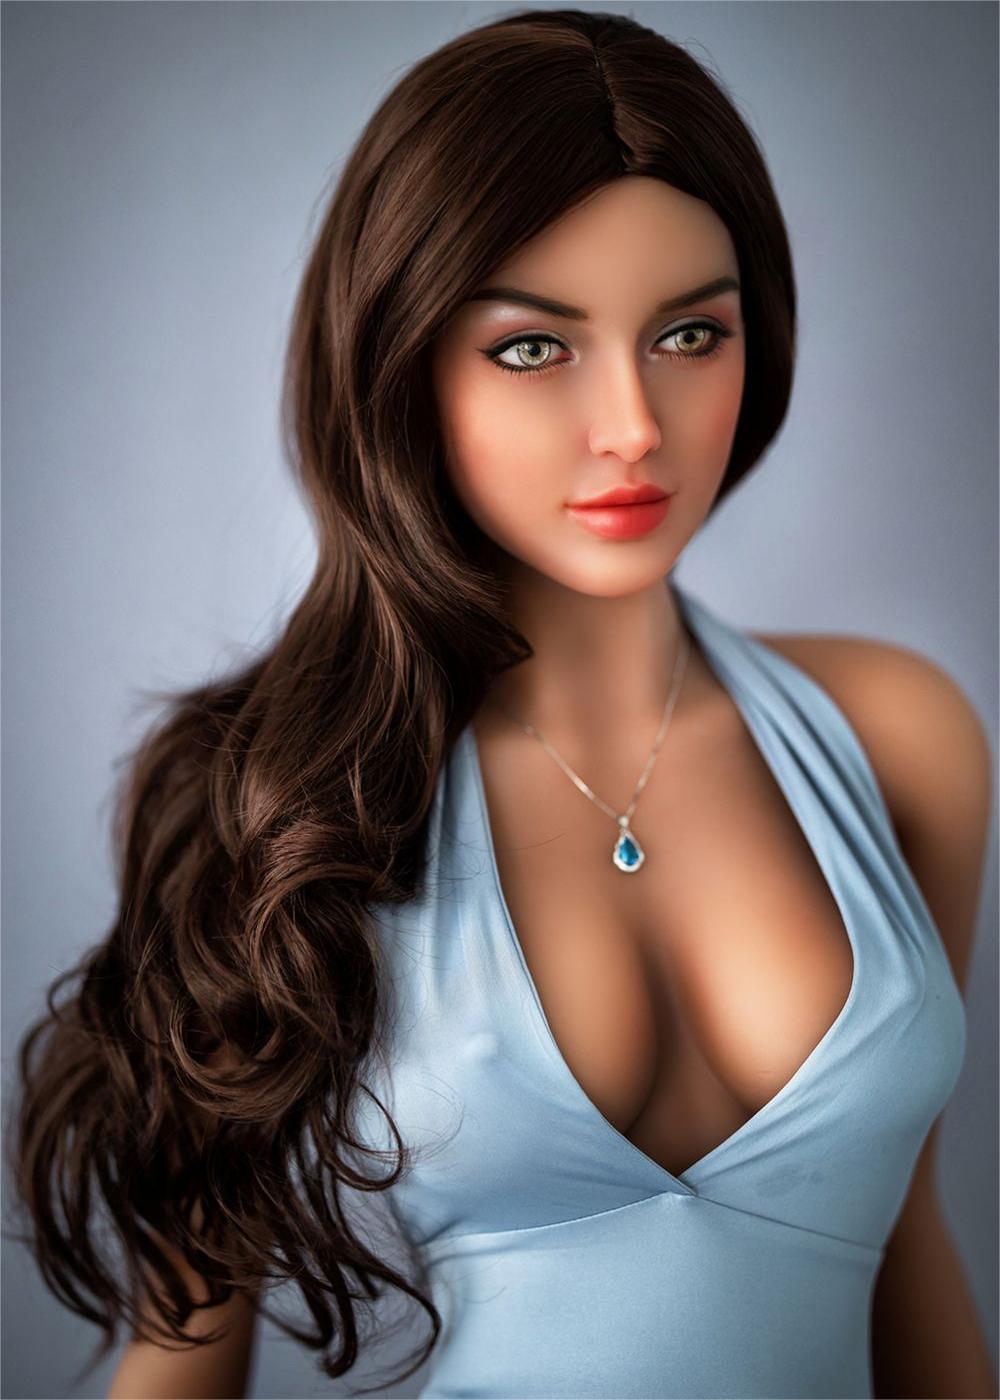 65.4IN 72.8LB Sexy Secretary Doll Wheat-colored Skin Curly Brown Hair Charming Toy